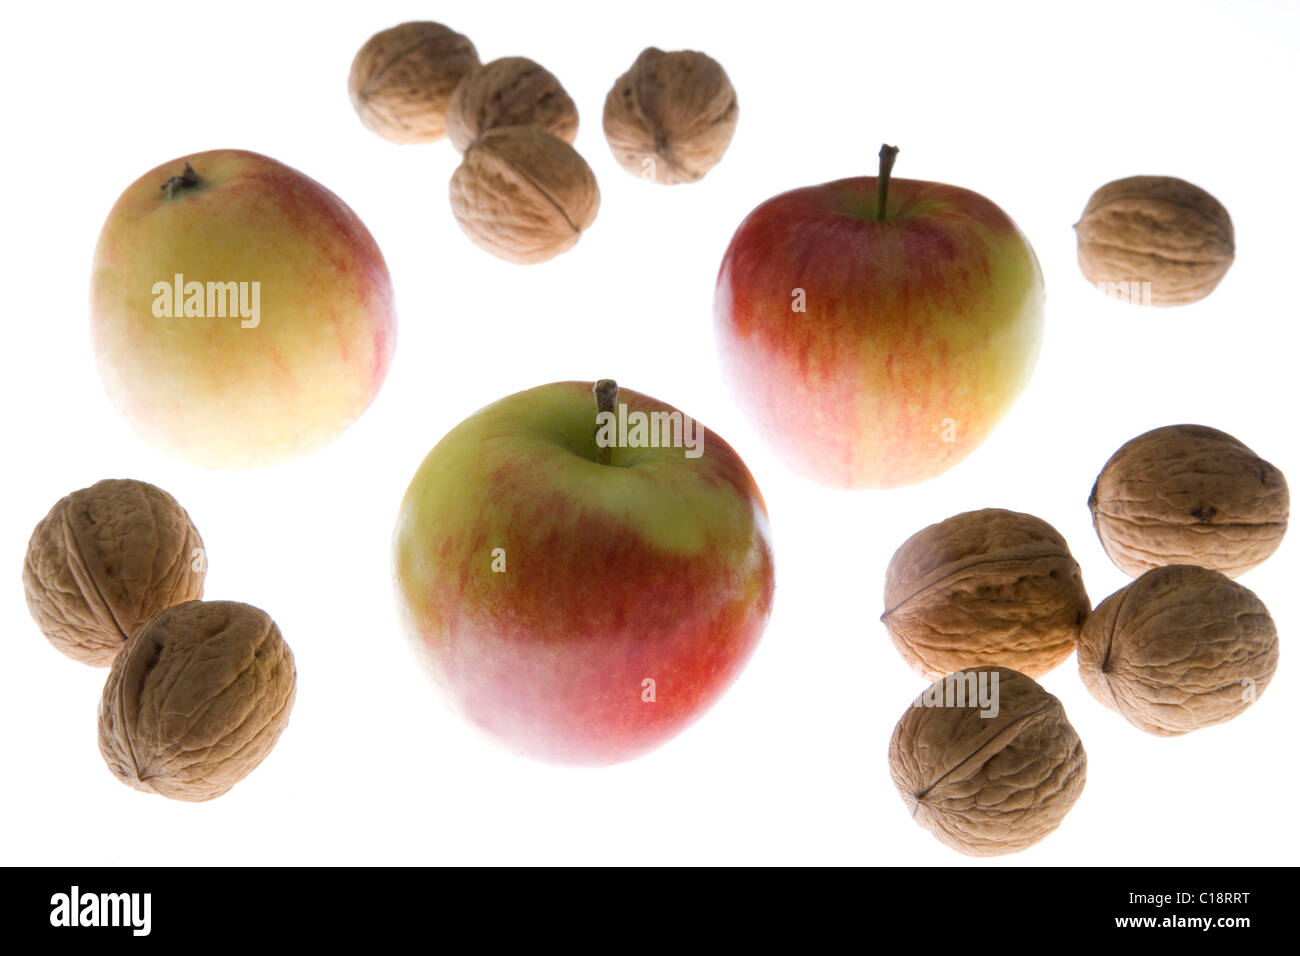 Walnuts with organic apples Stock Photo